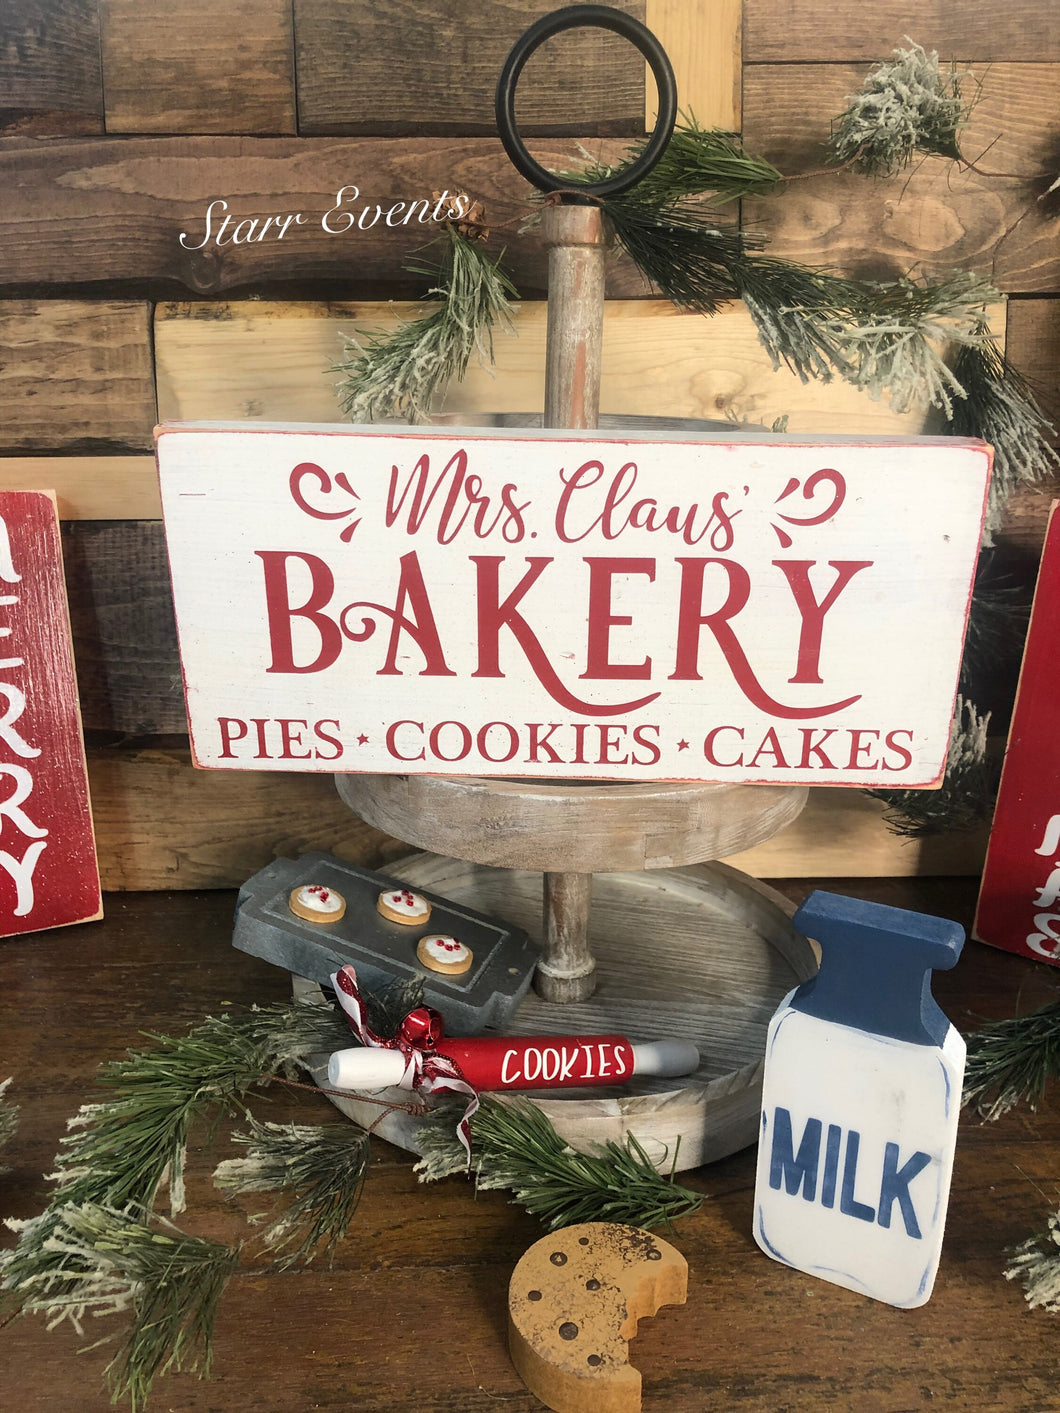 Mrs Claus bakery sign. Christmas signs. Christmas decor. Christmas decorations. Christmas tier tray decor. Christmas decorating ideas.